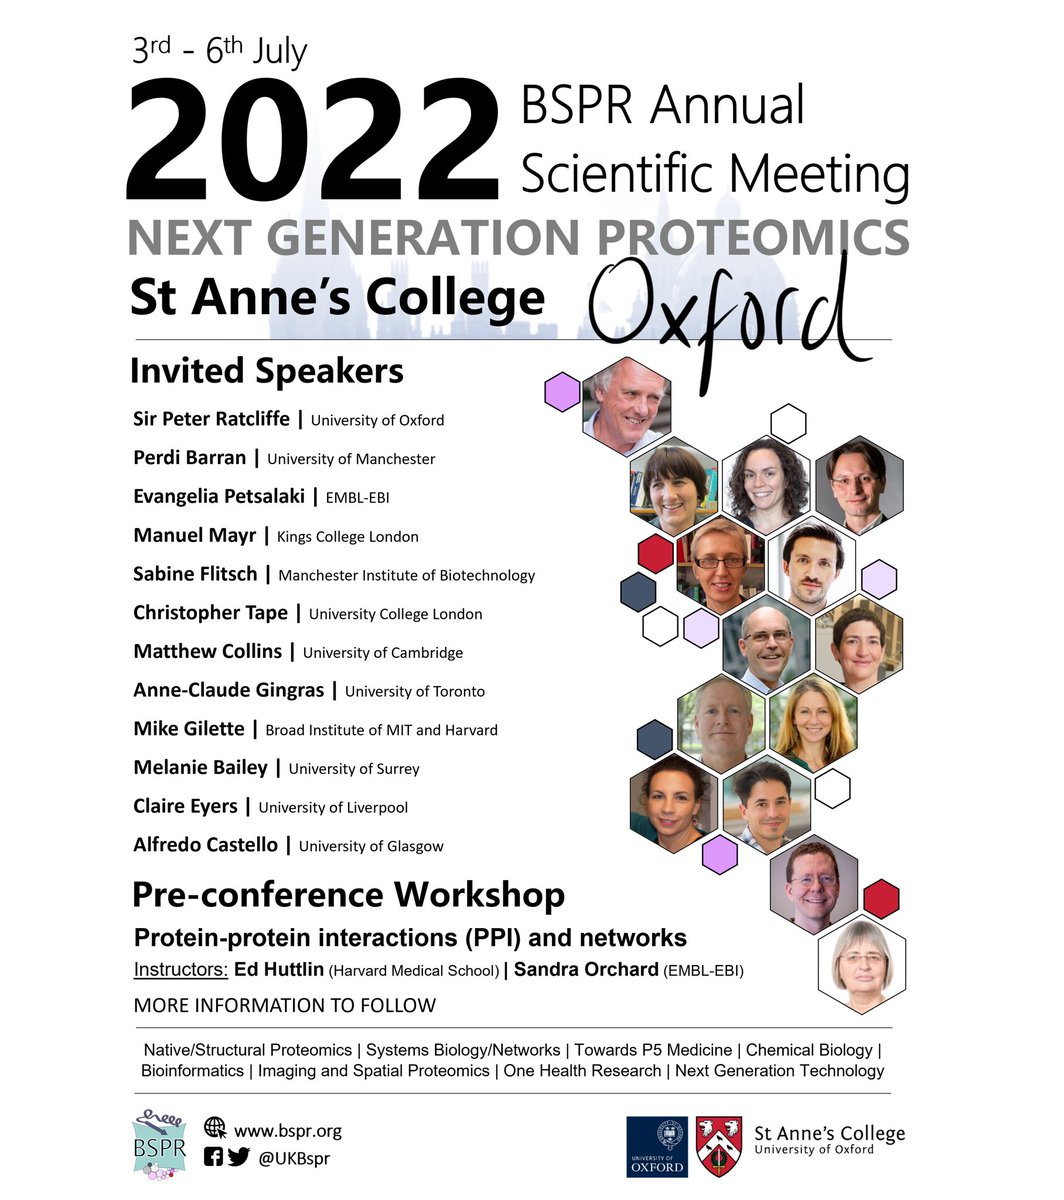 #BSPR2022 meeting in Oxford, from 3rd to 6th of July! Exciting scientific #research updates, with emphasis on #NextGenerationProteomics!